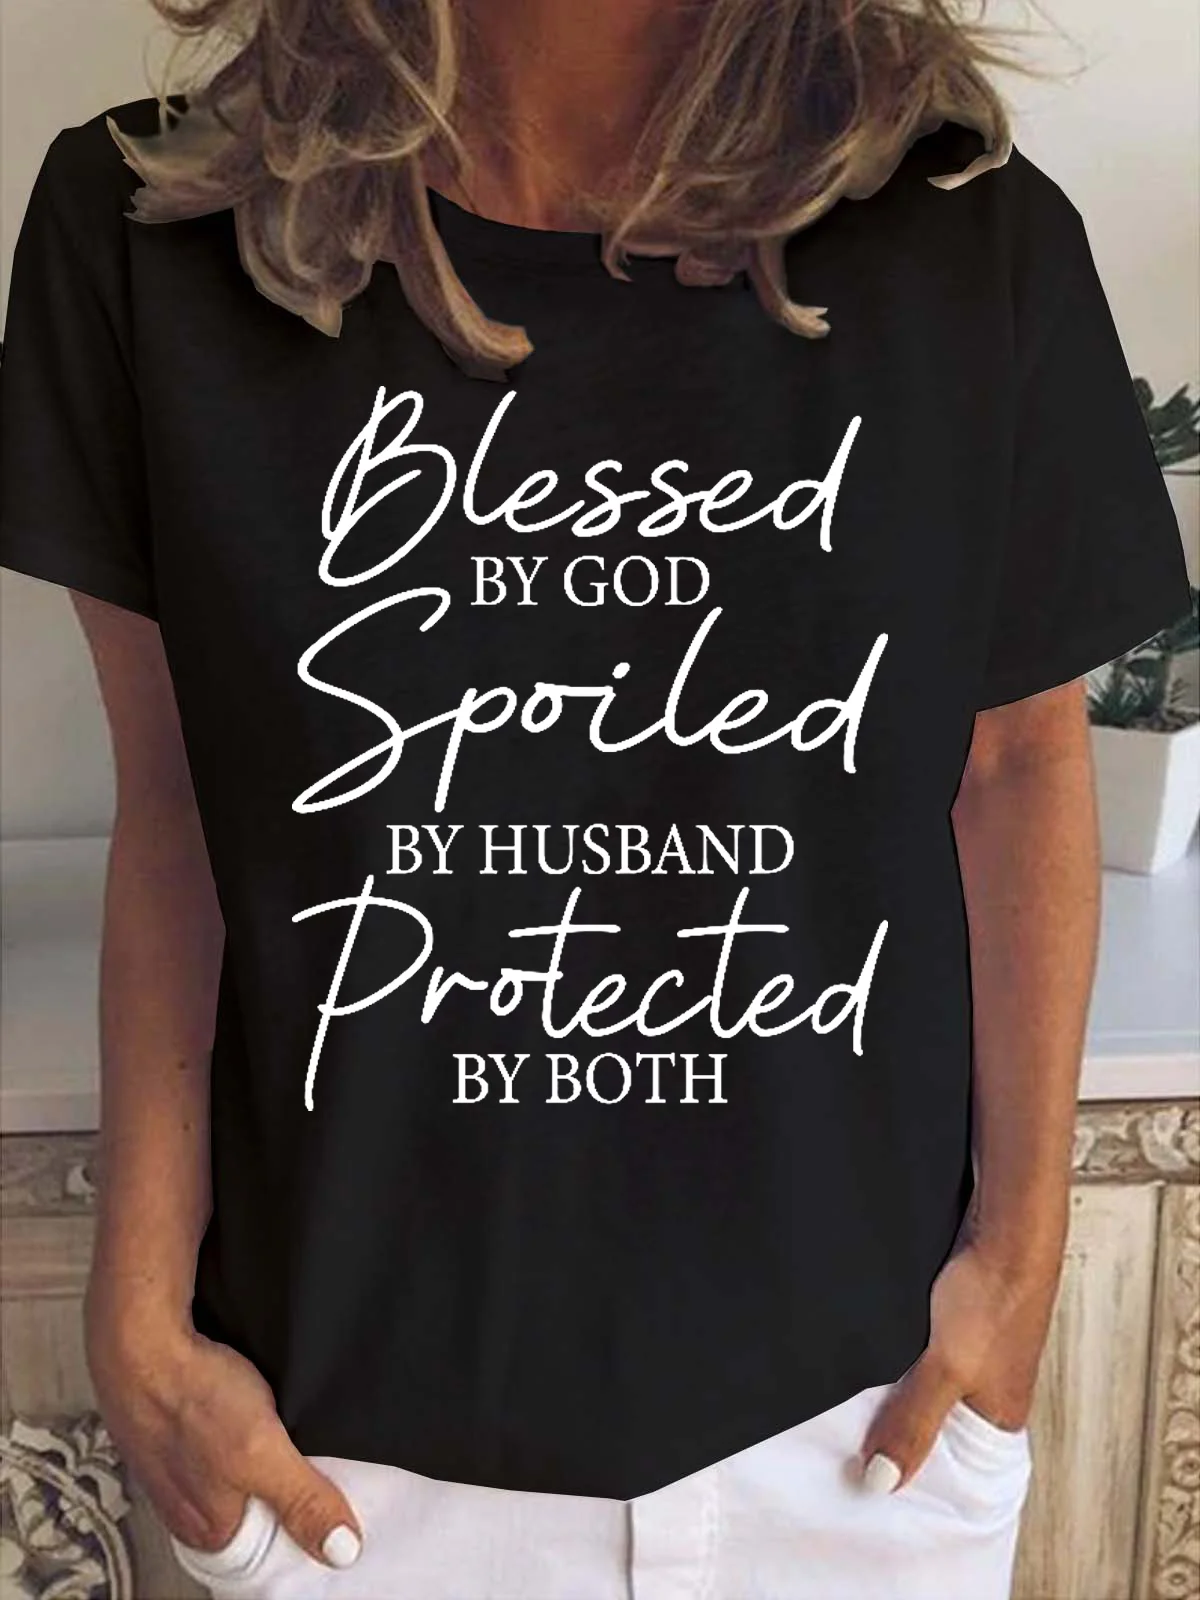 Blessed By God Spoiled By Husband Protected By Both Women's Short sleeve Top